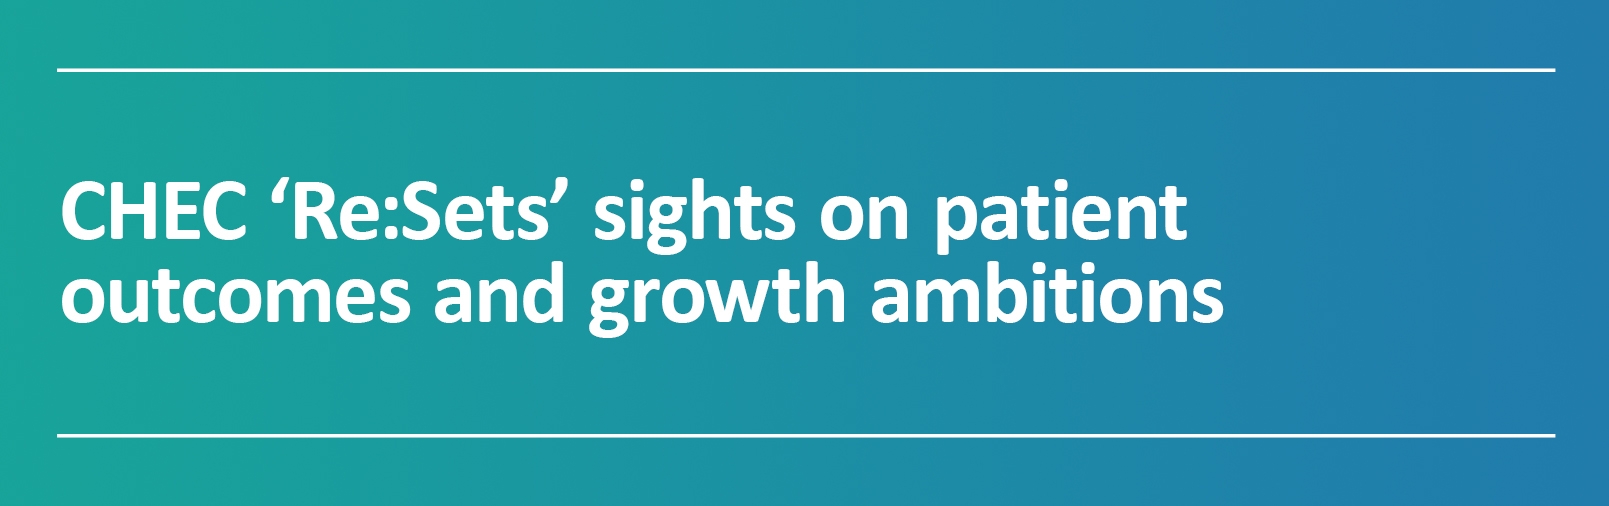 chec resets sights on patient outcomes and growth ambitions